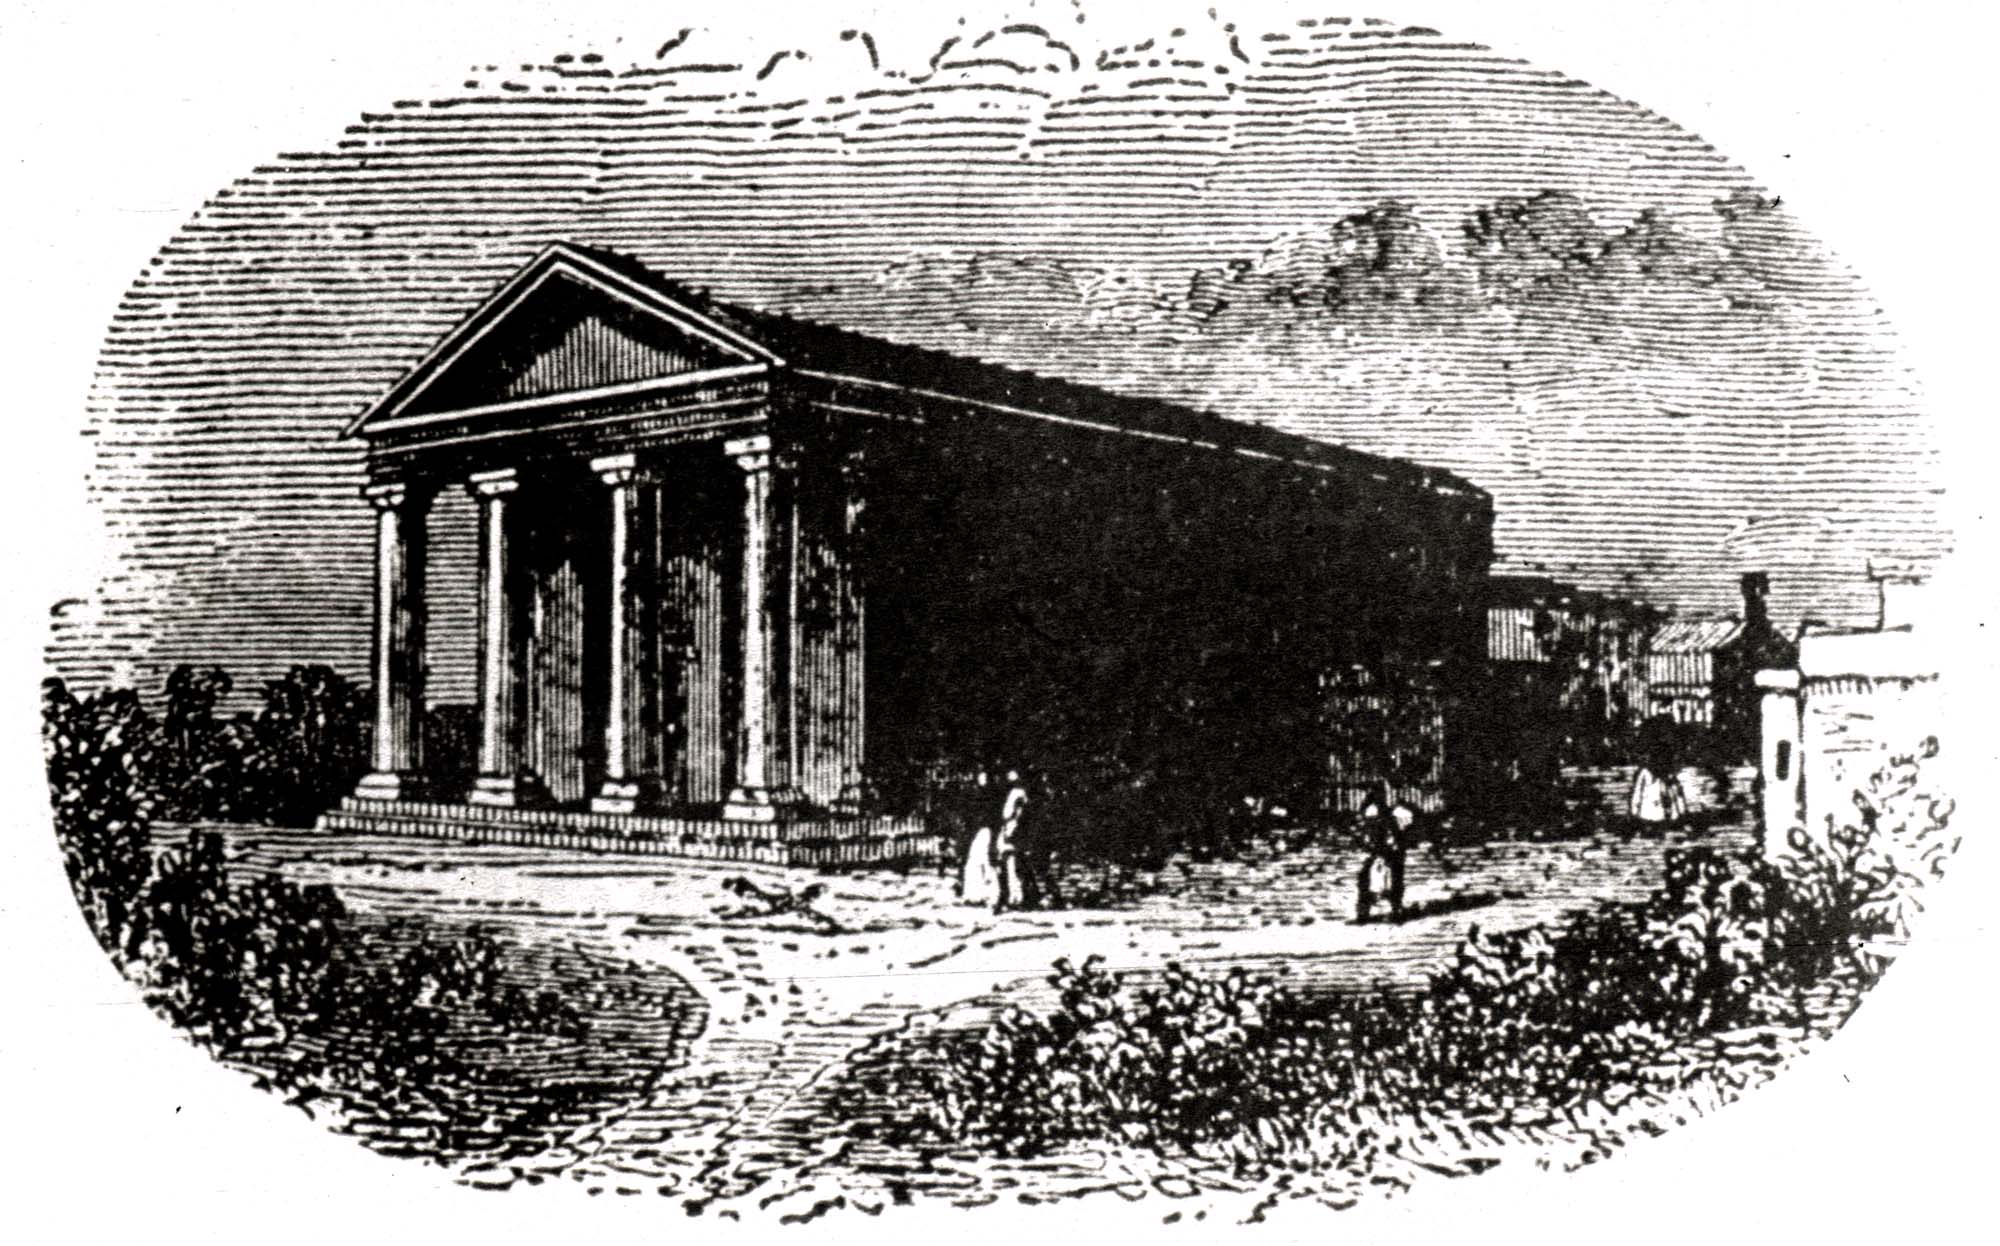 The Proprietary School Building in 1840 before the various additions and extensions -